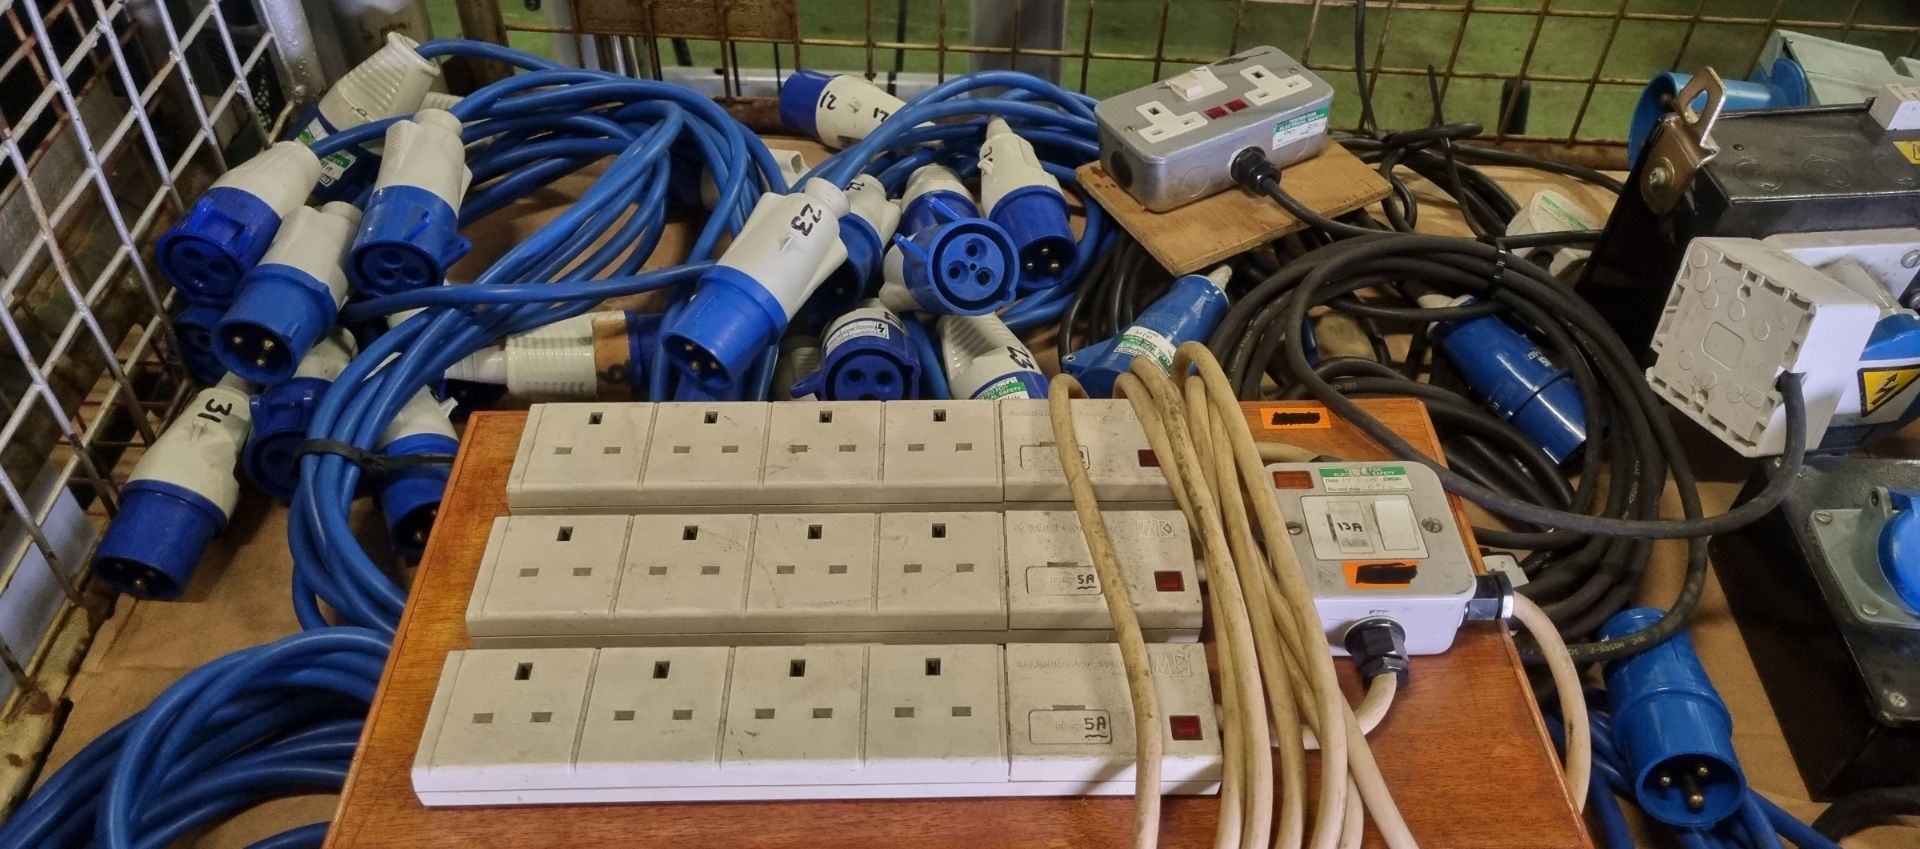 240V mixed length extension leads - multiple plug and socket types - Image 2 of 5